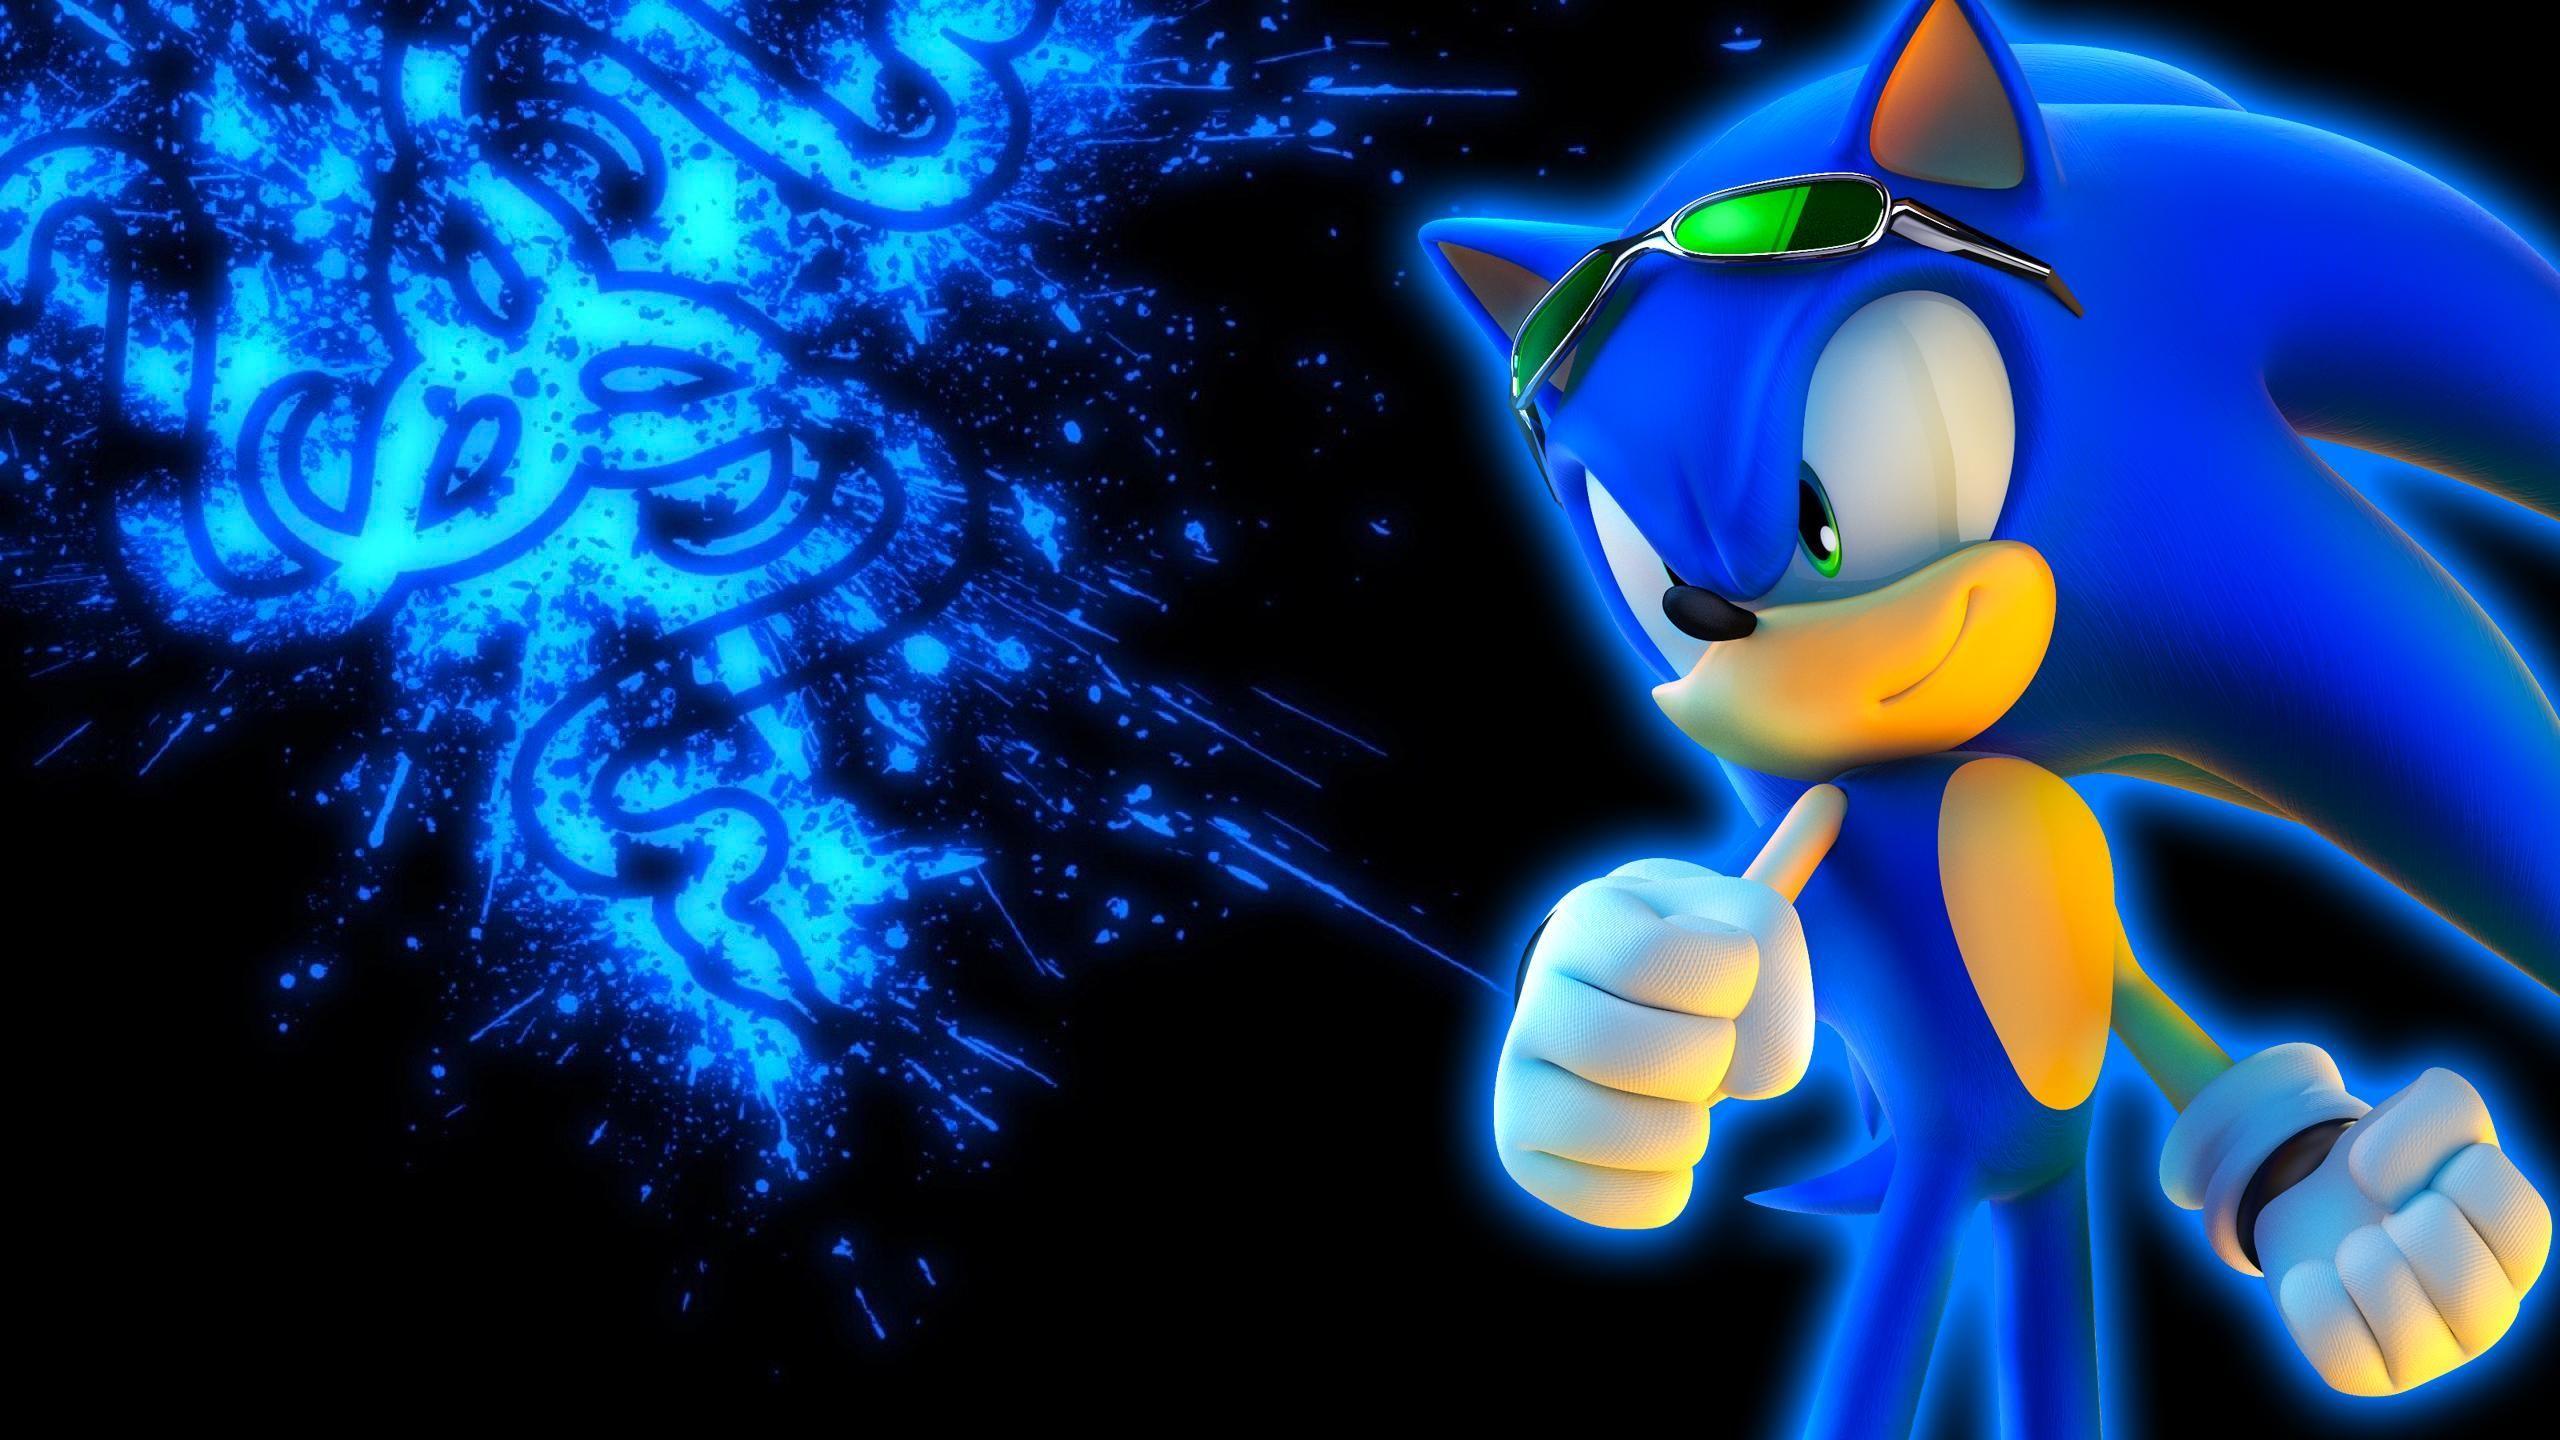 Sonic The Hedgehog HD Wallpaper. Background